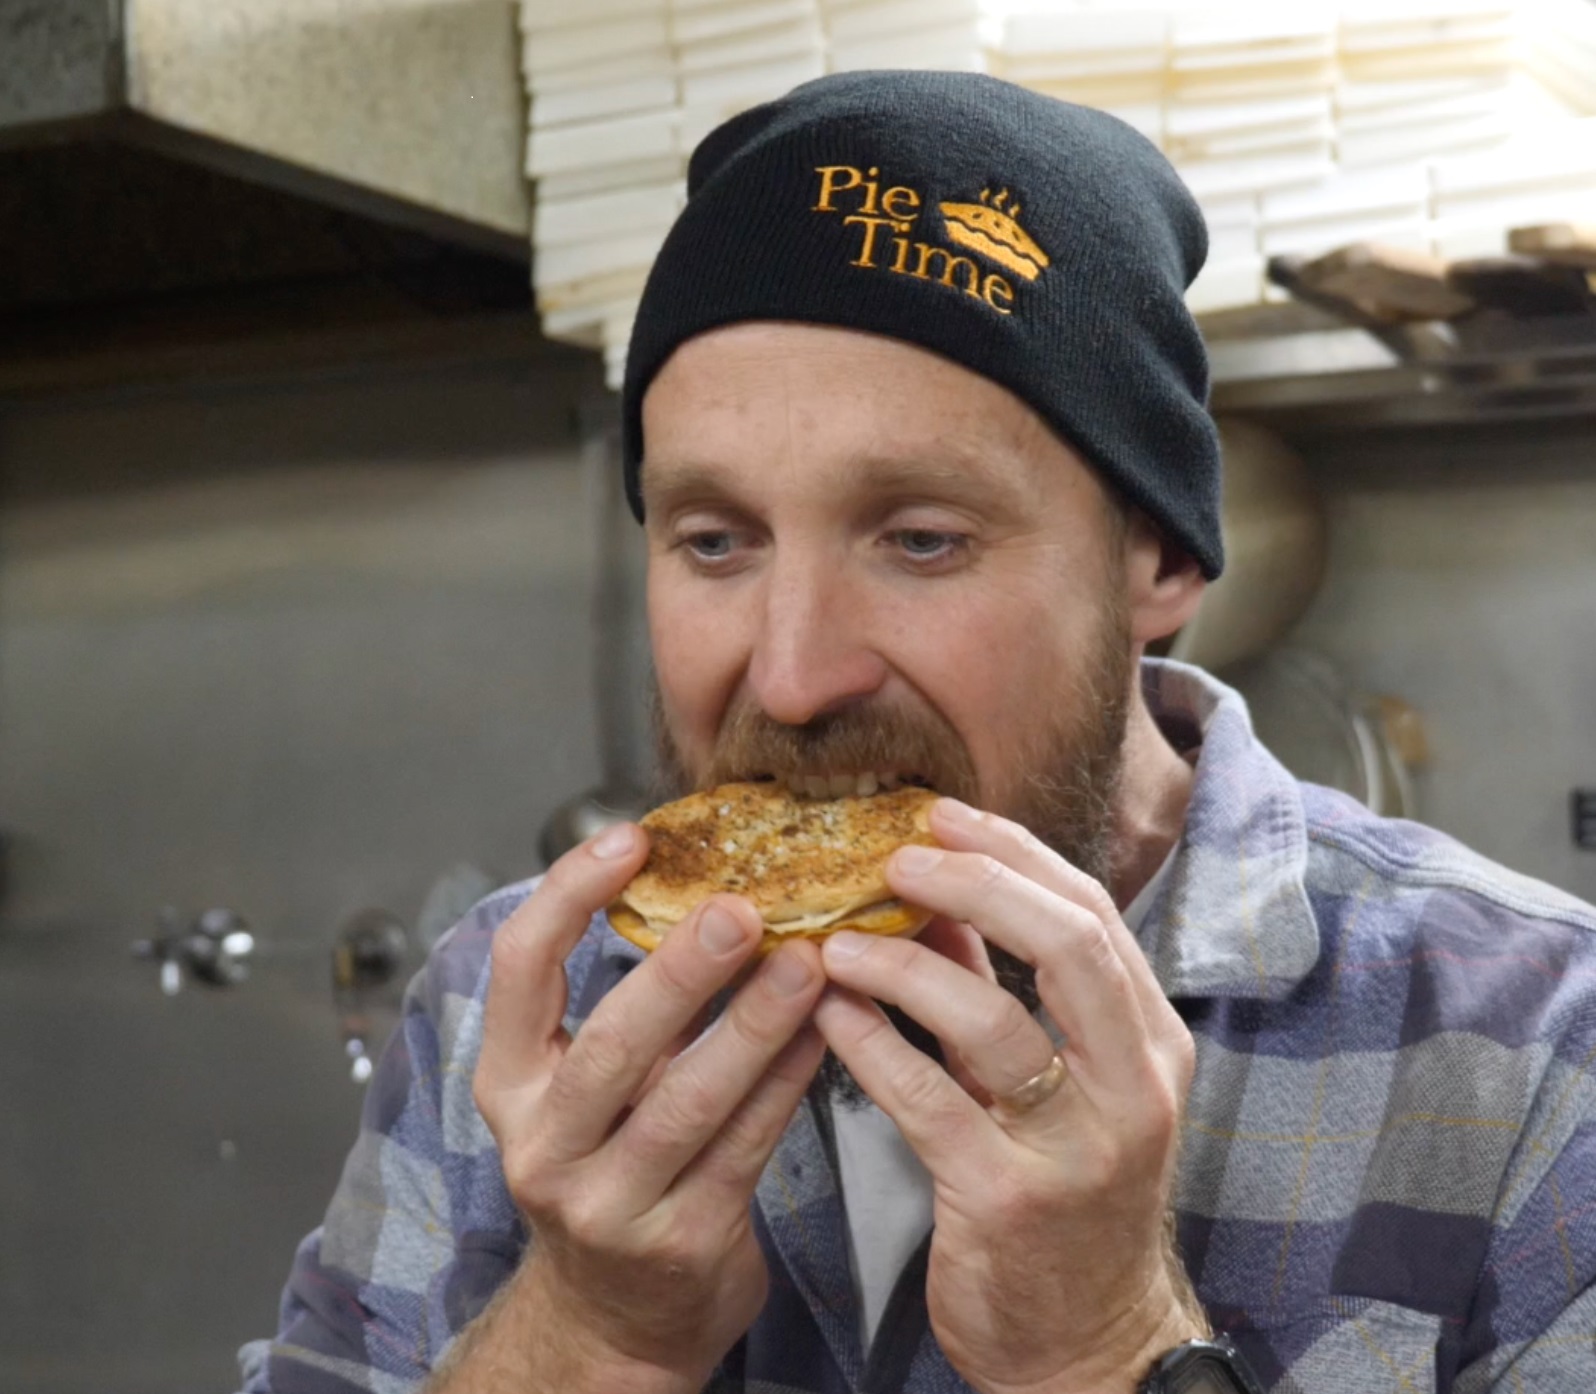 Paul from Pie Time enjoying one of their delicious pies